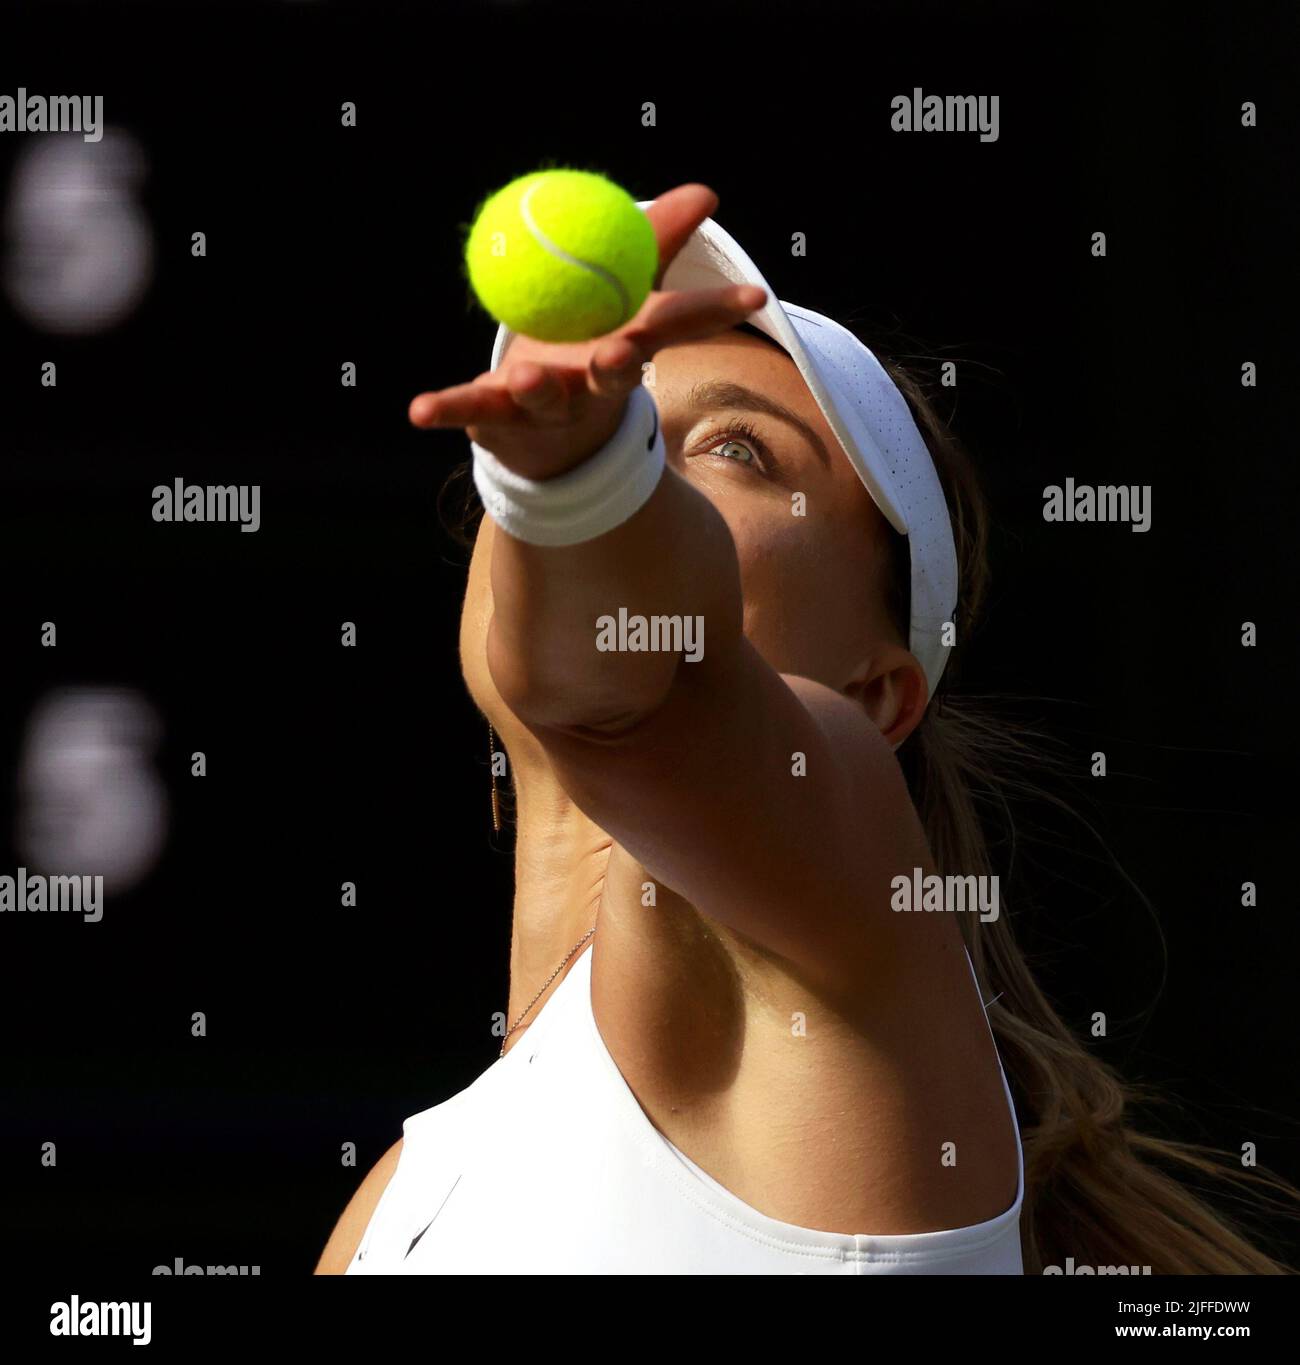 London. Number 4 seed Paula Badosa of, Spain. 2nd July, 2022. serving during her match against Petra Kvitova, of the Czech Republic. Badosa won the match in straight sets. Credit: Adam Stoltman/Alamy Live News Stock Photo